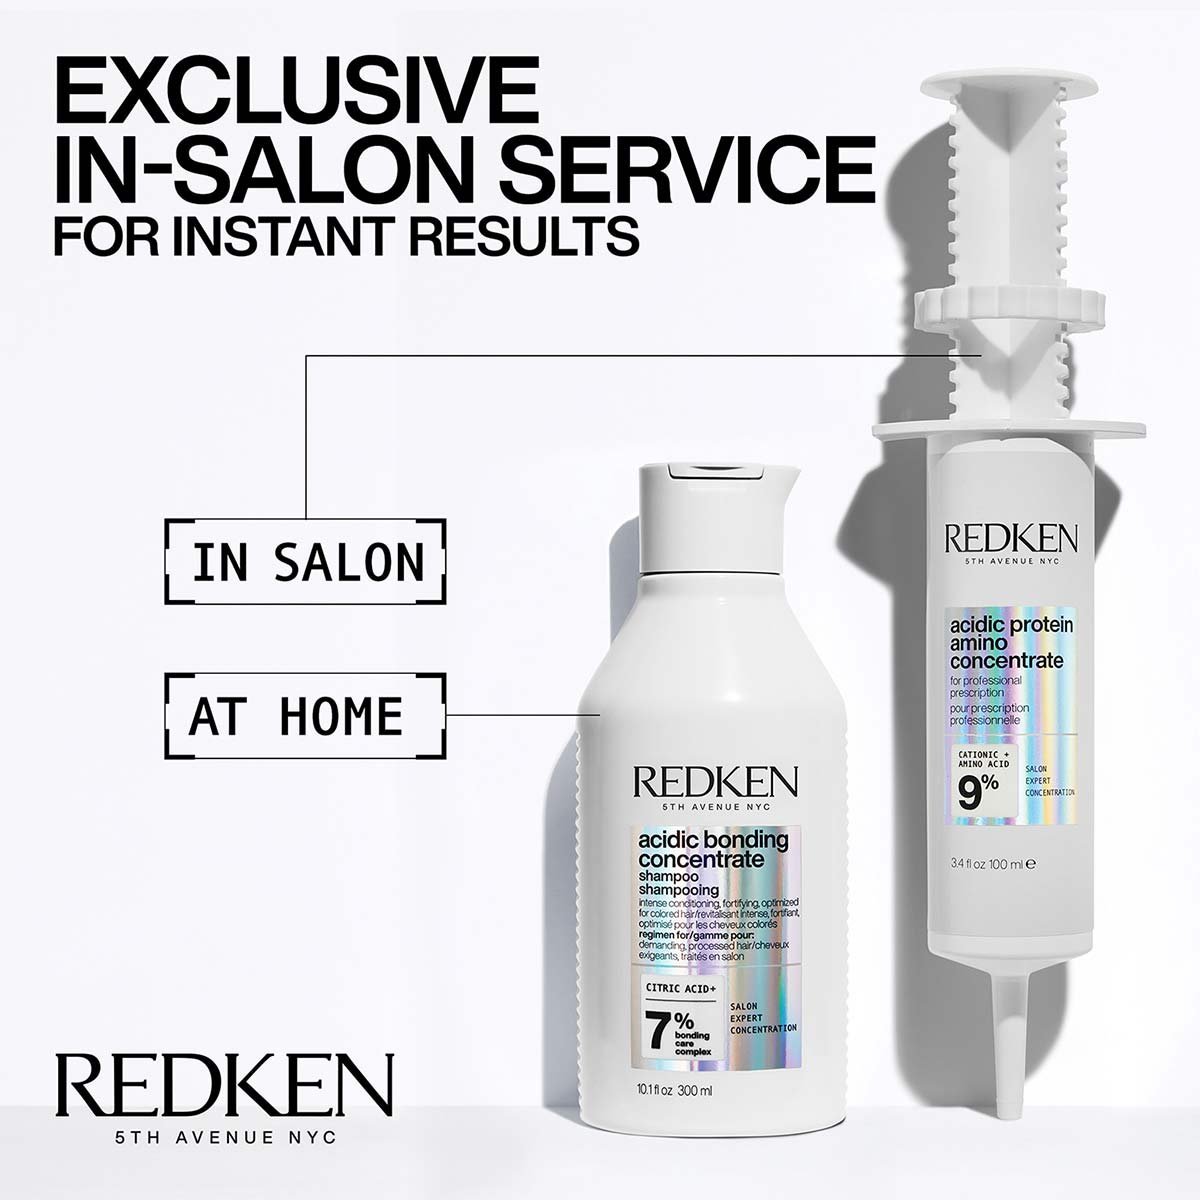 Acidic Bonding Concentrate: Exclusive In-Salon Service For Instant Results